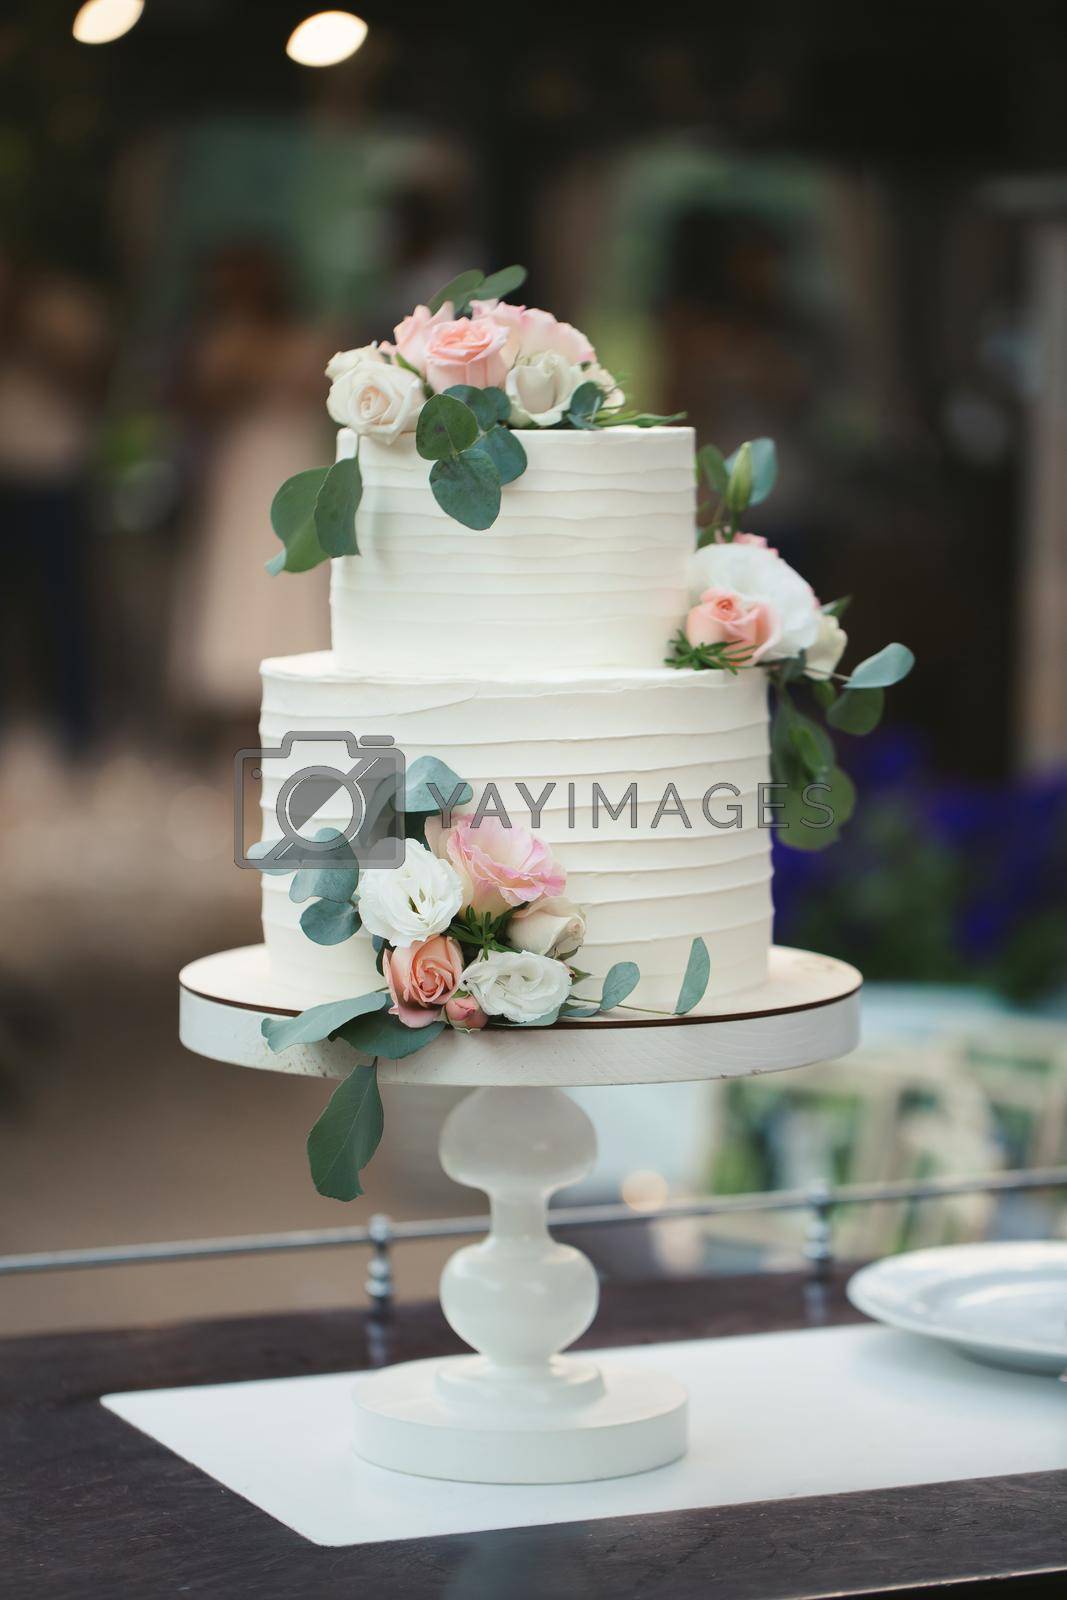 Royalty free image of Beautiful wedding cake for the newlyweds at the wedding. A birthday cake at a banquet by StudioPeace